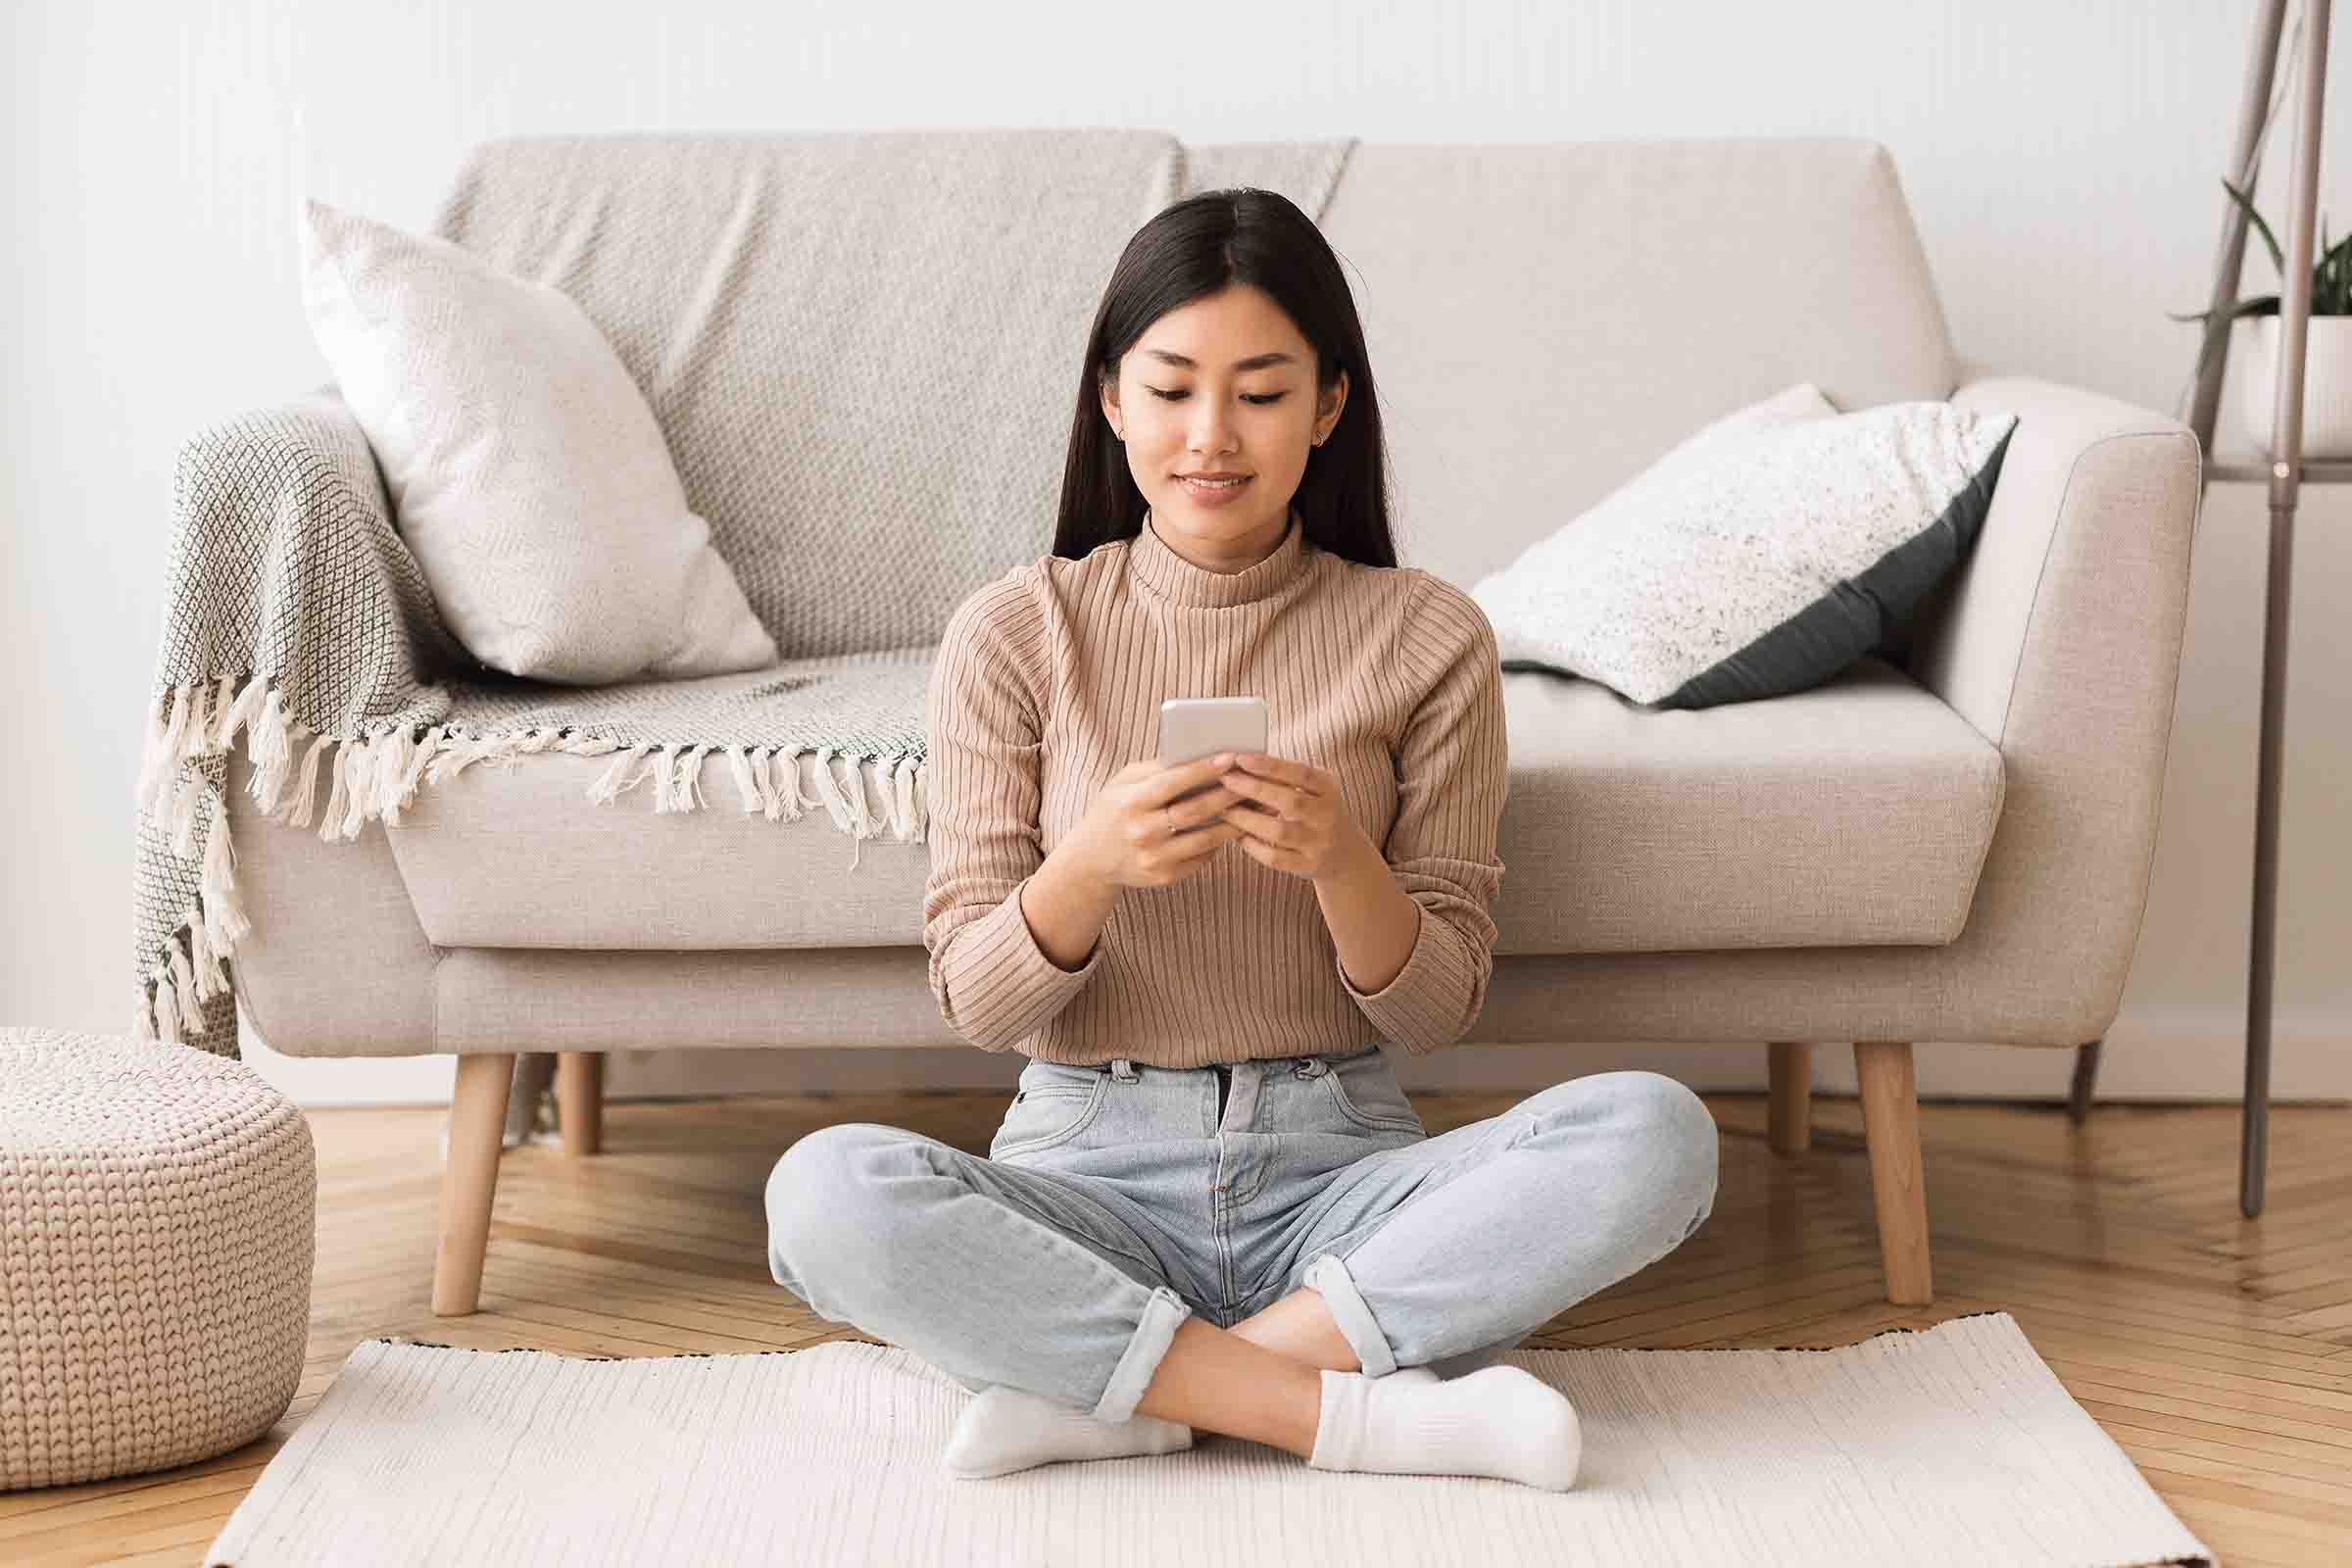 Lady sitting on a warm floor using her phone.